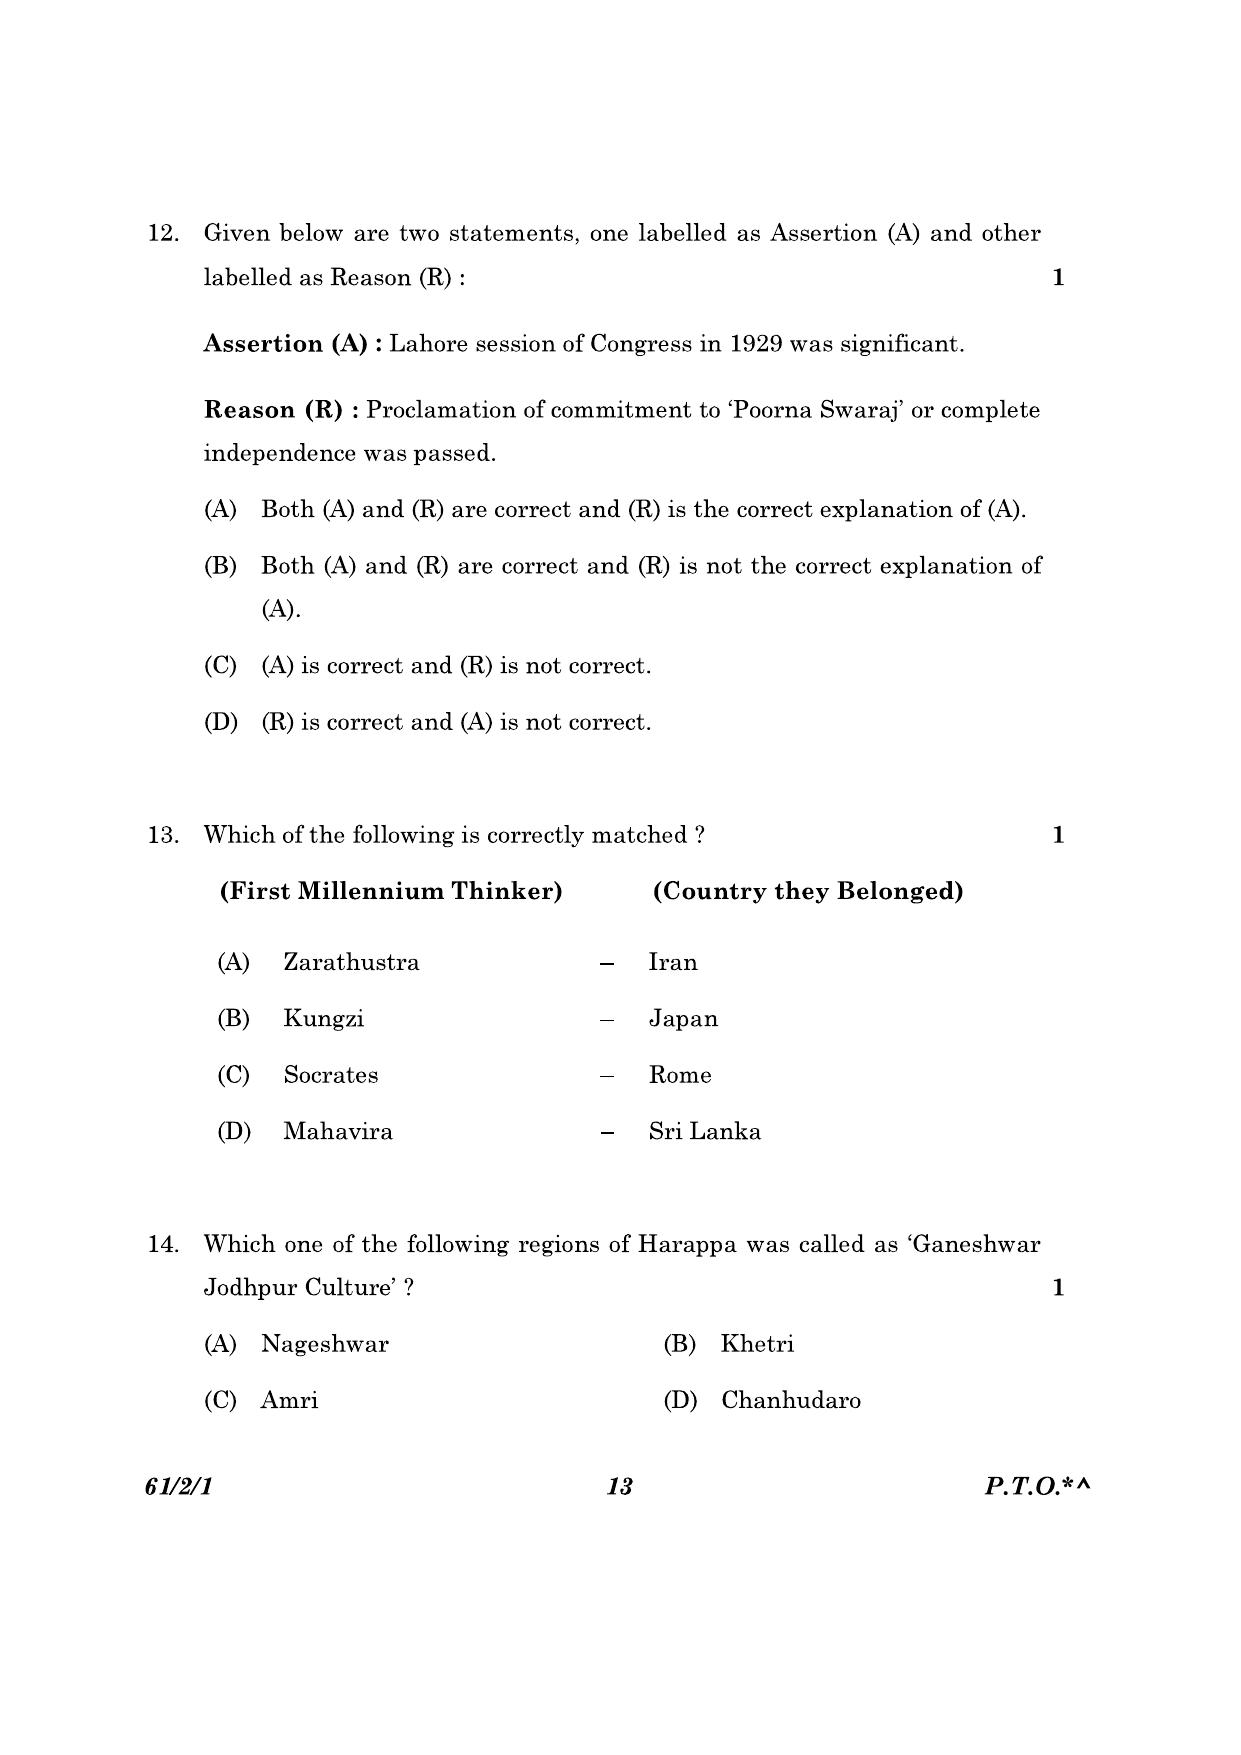 CBSE Class 12 61-2-1 History 2023 Question Paper - Page 13